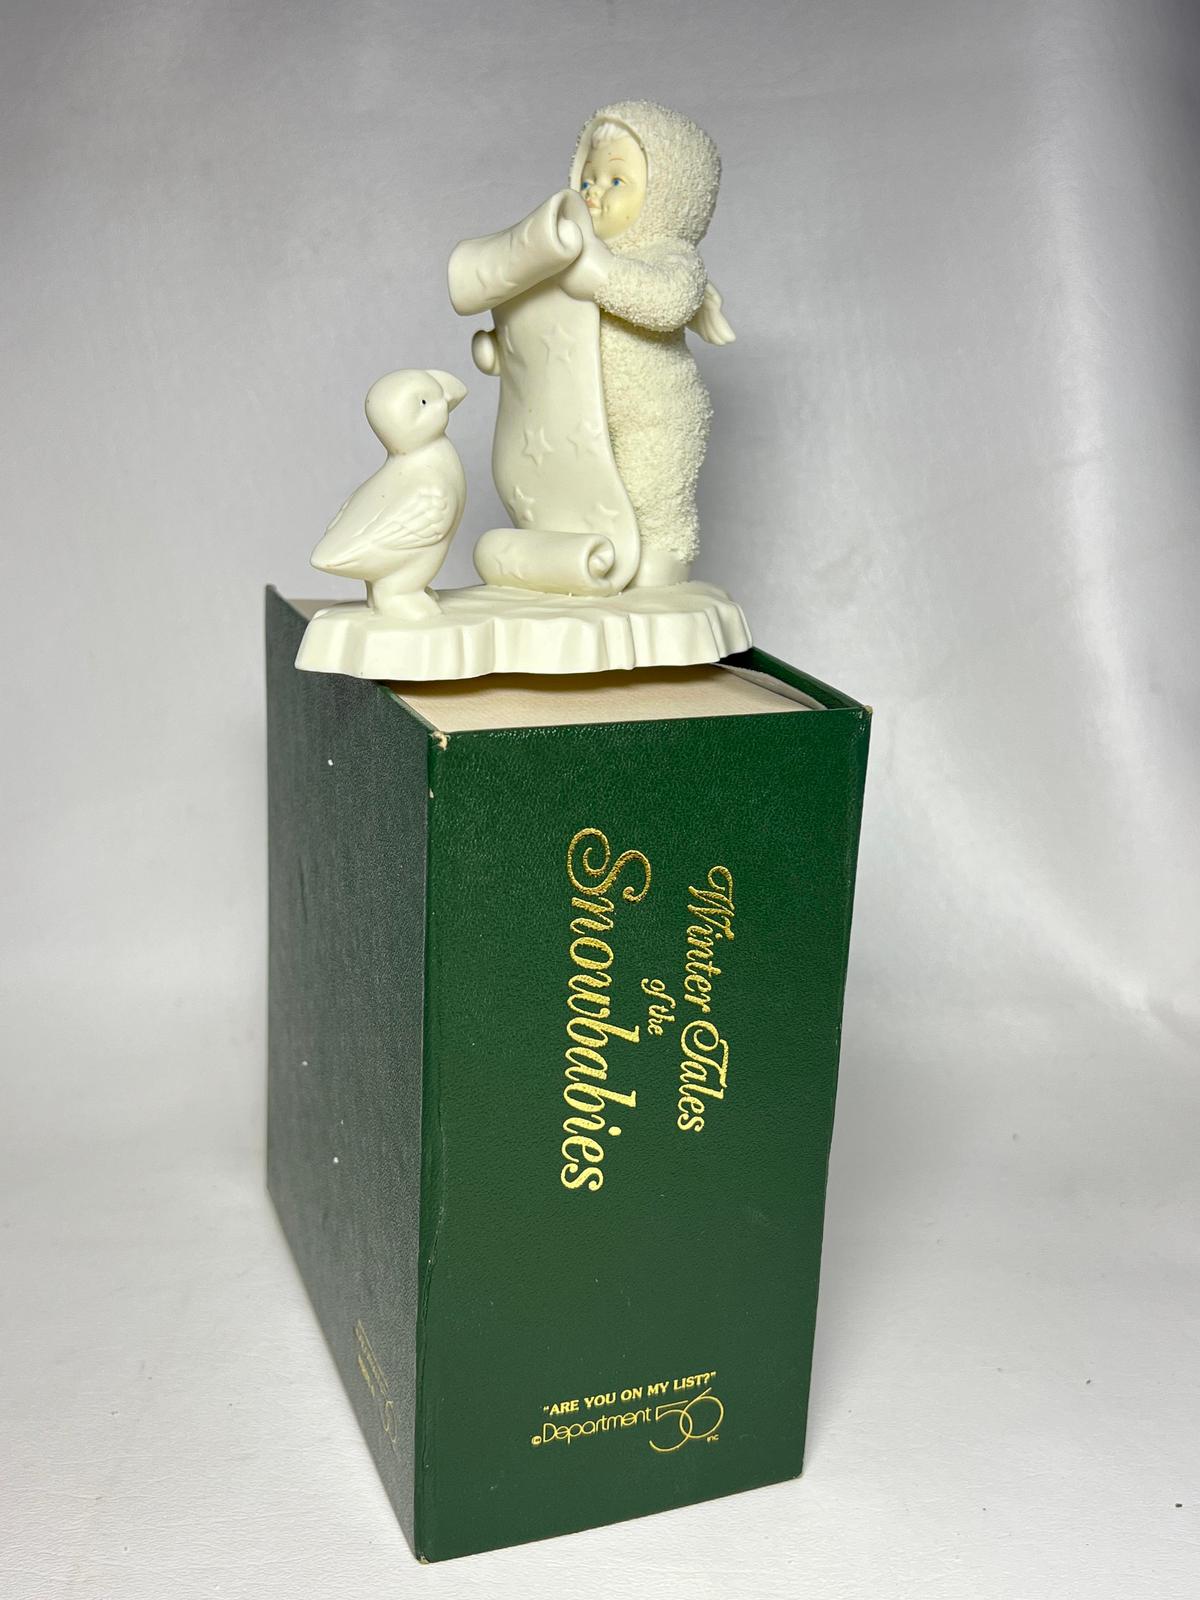 SNOWBABIES "Are You On My List?" Figurine in Box